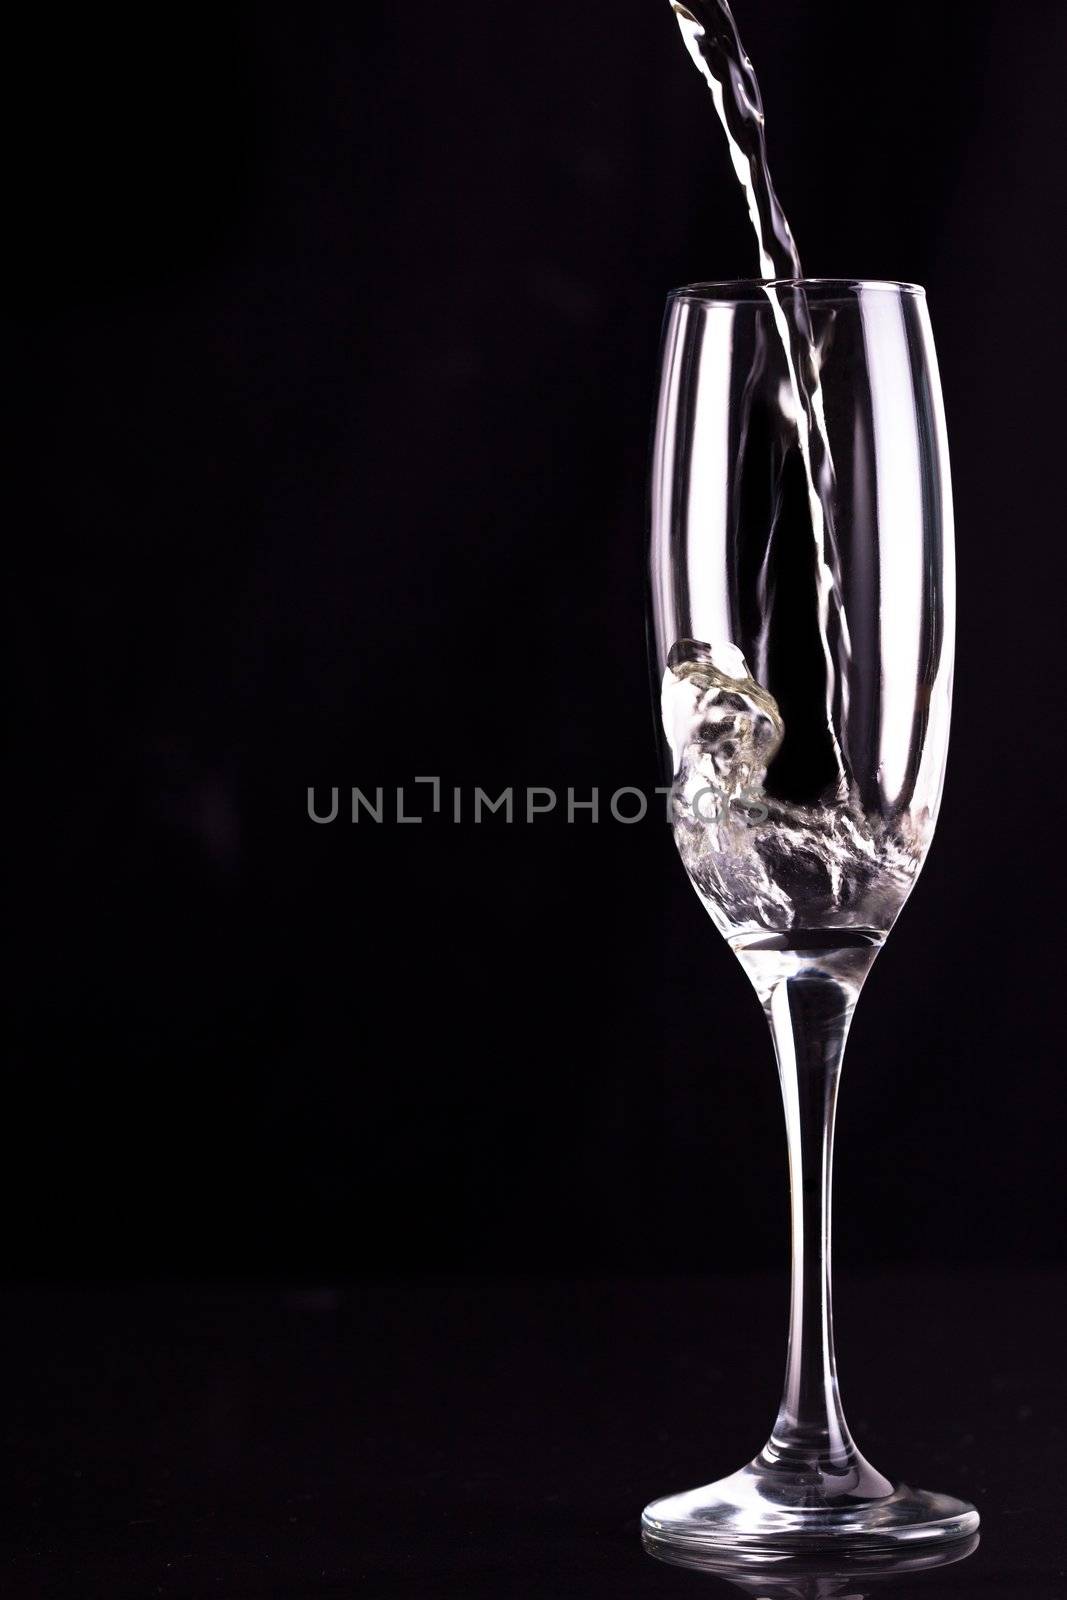 Empty champagne flute being filled against black background